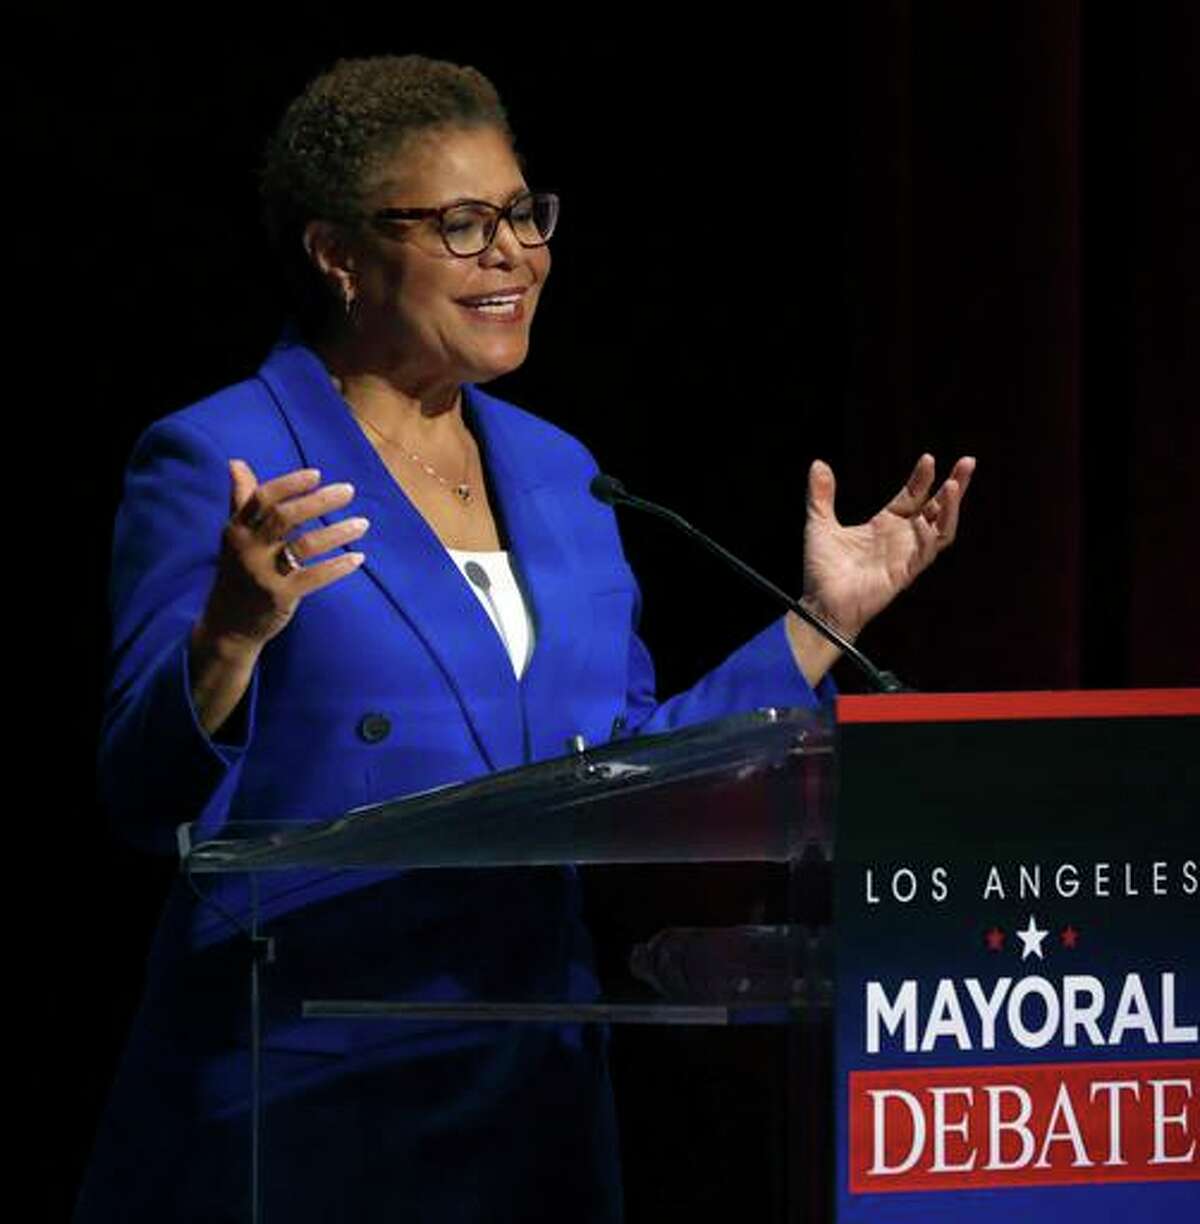 Rep. Karen Bass, a former California Assembly speaker, is leading the polls in the race for mayor of Los Angeles.